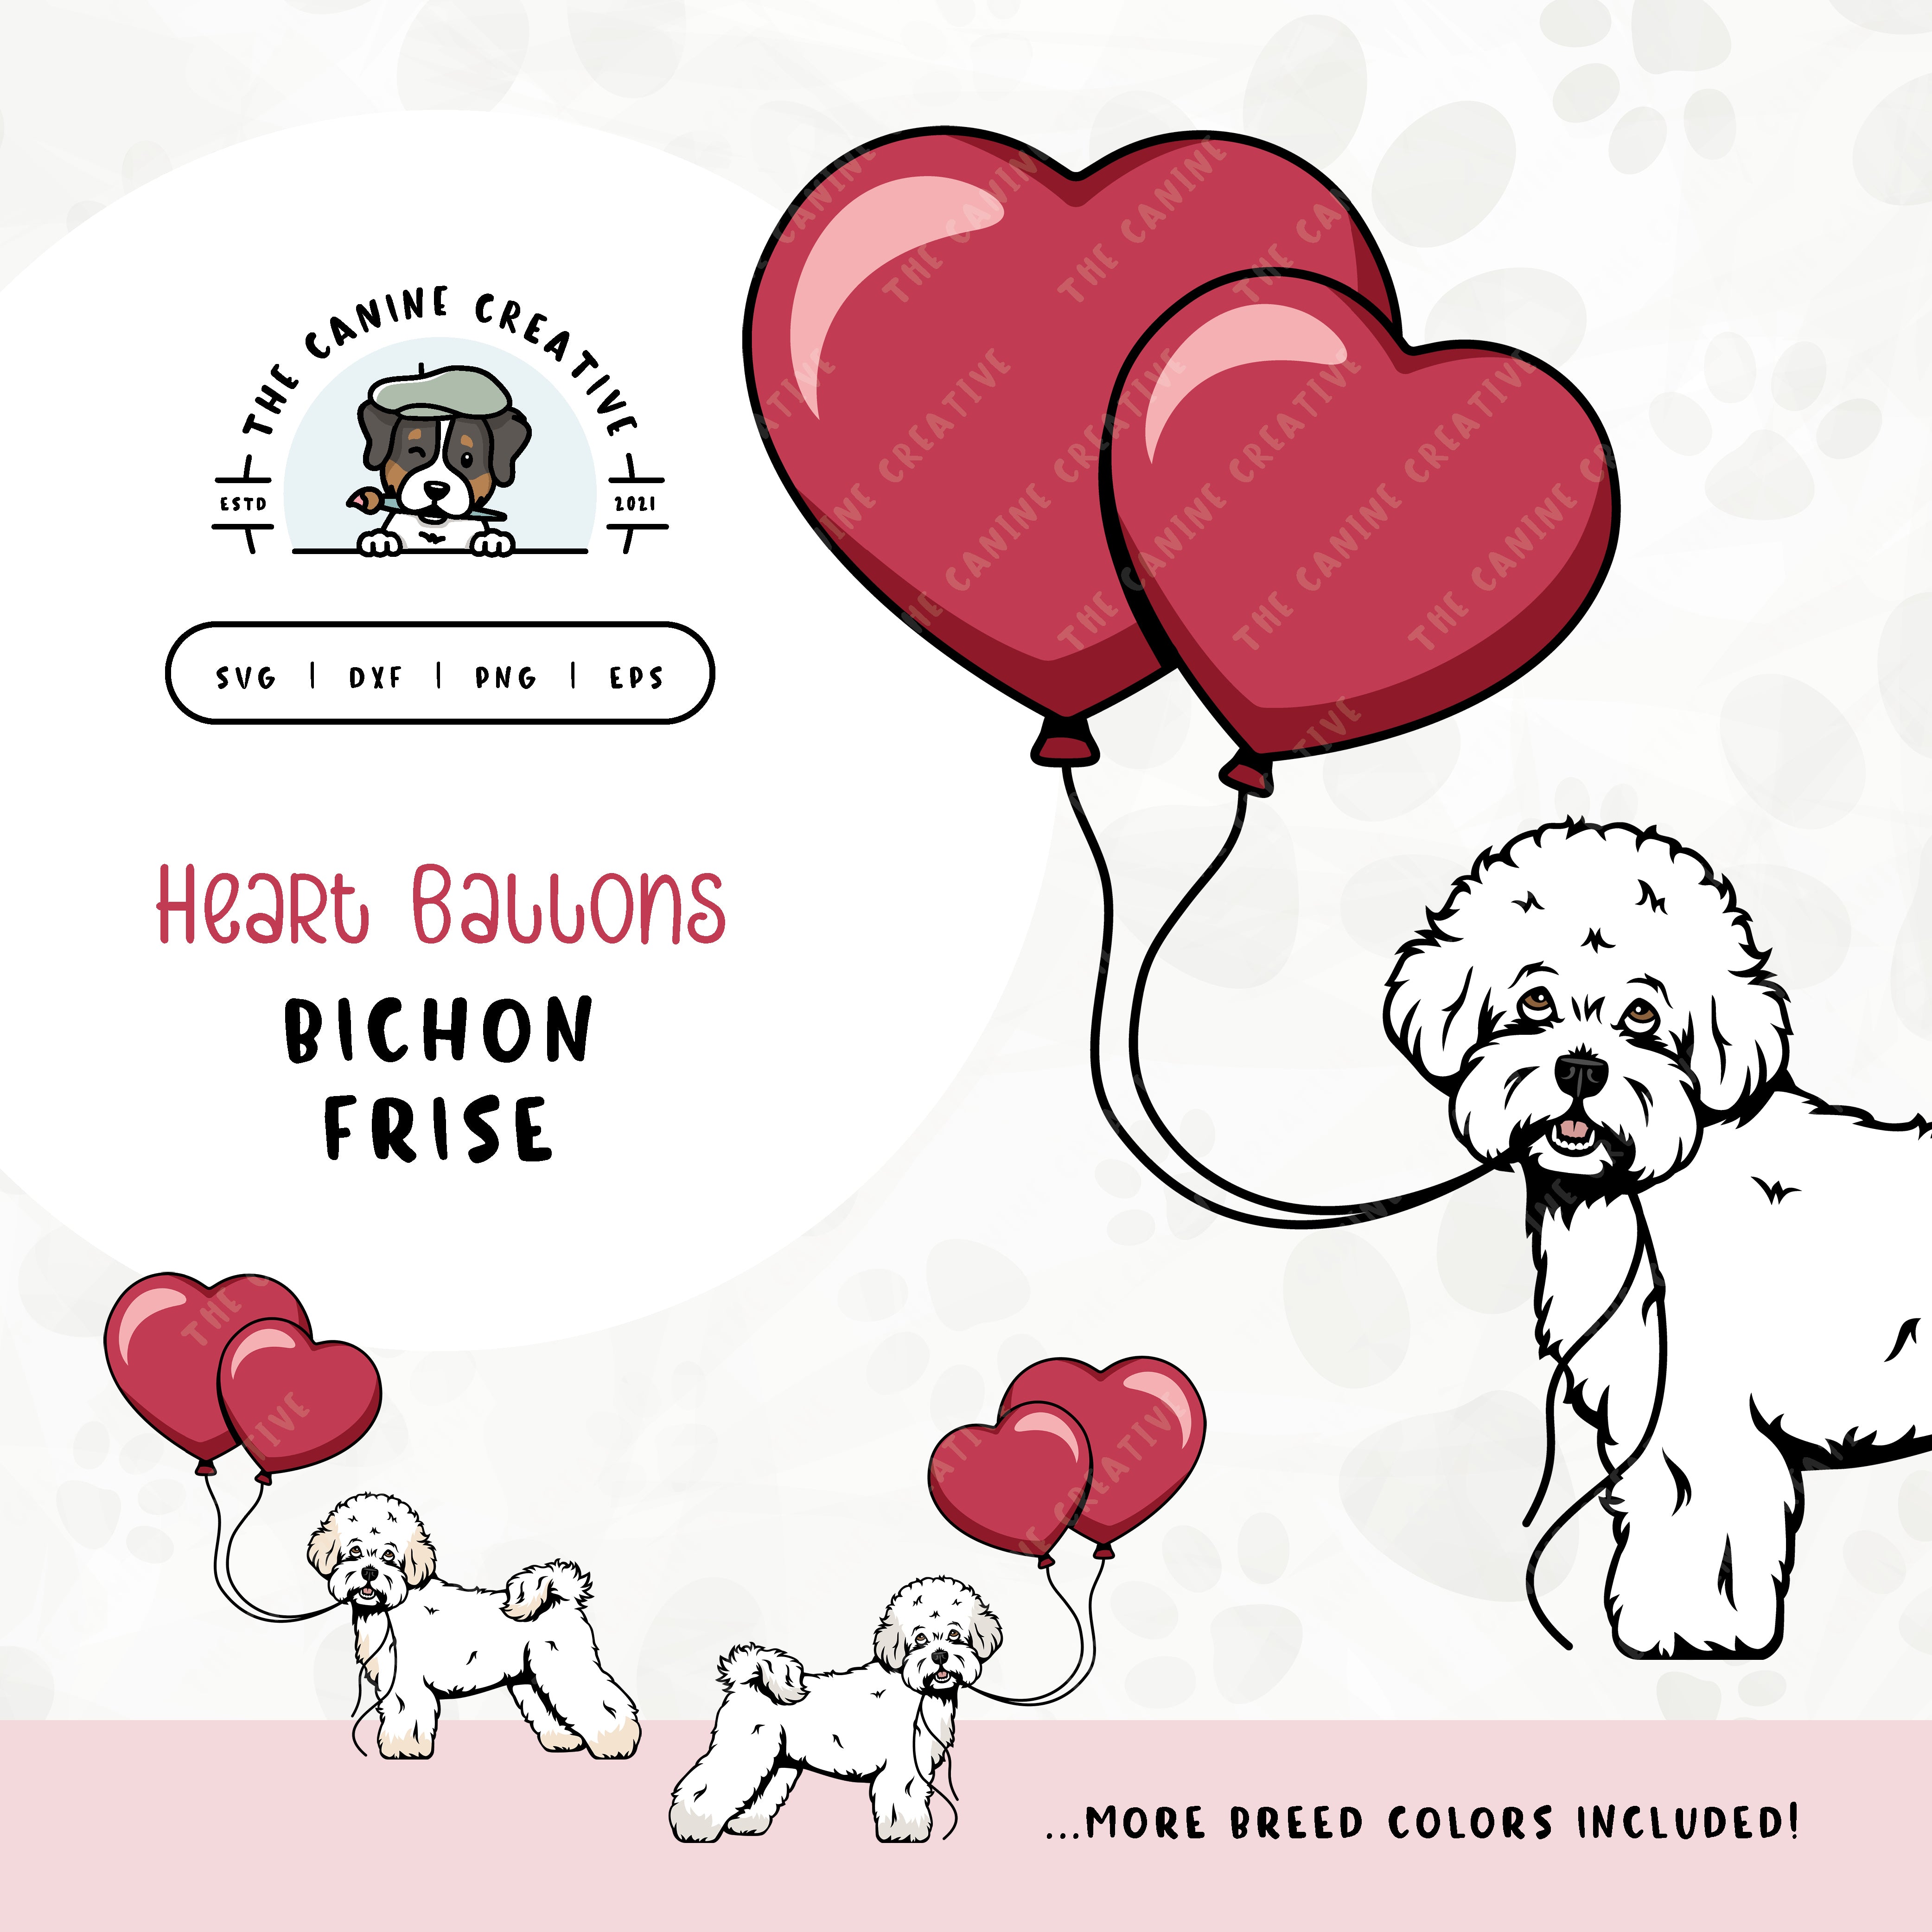 This charming illustration of a Bichon Frise features a dog holding heart-shaped balloons. File formats include: SVG, DXF, PNG, and EPS.